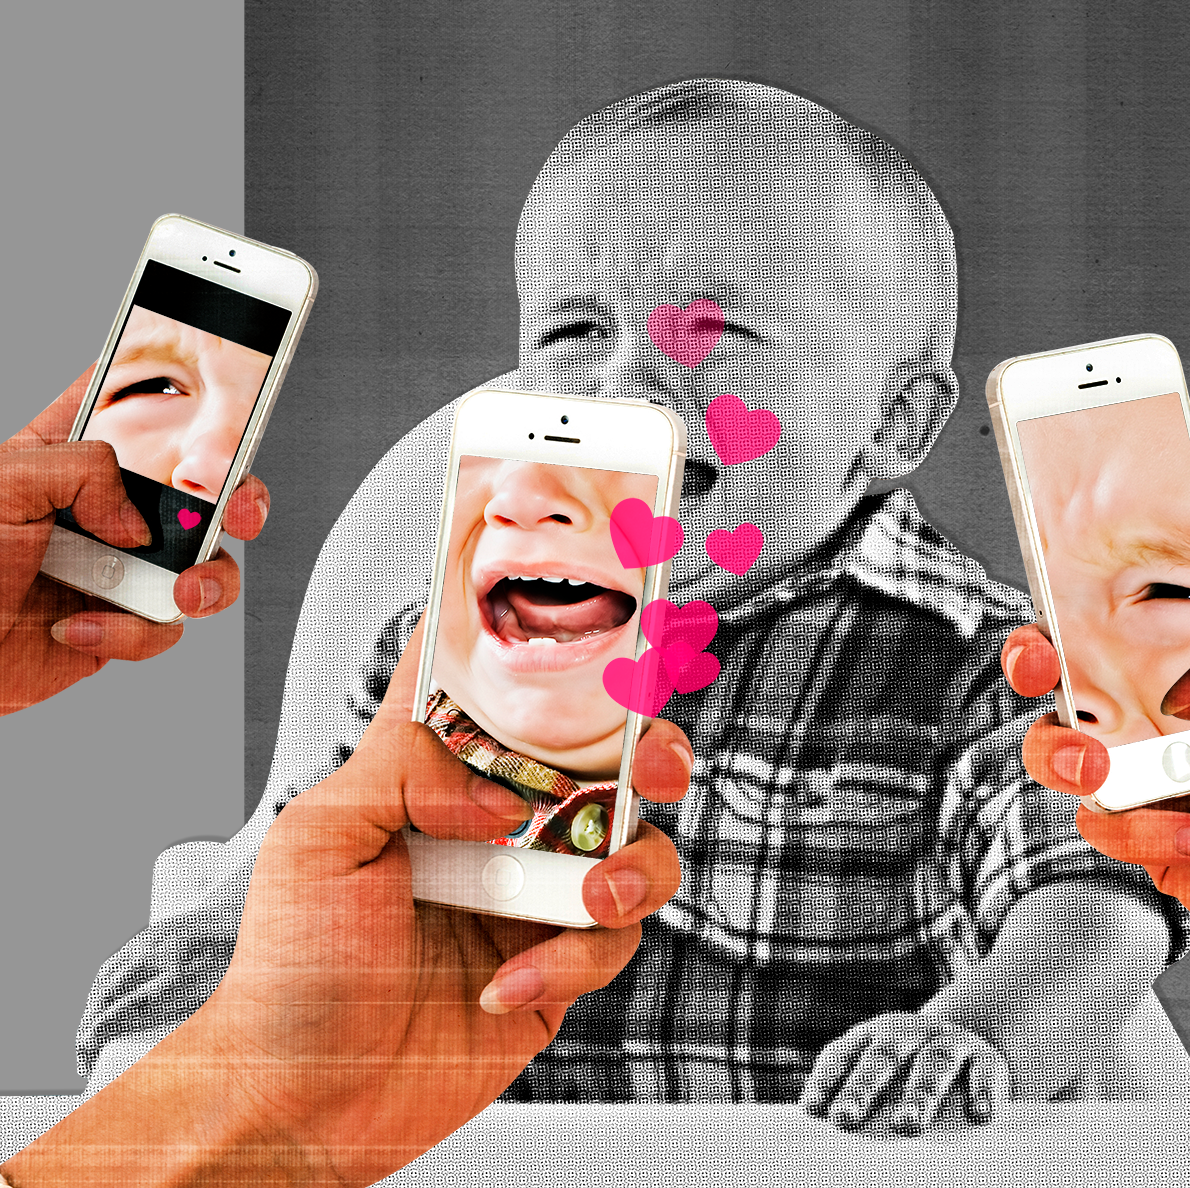 The Parenting Influencers Who Won't Stop Posting Their Children